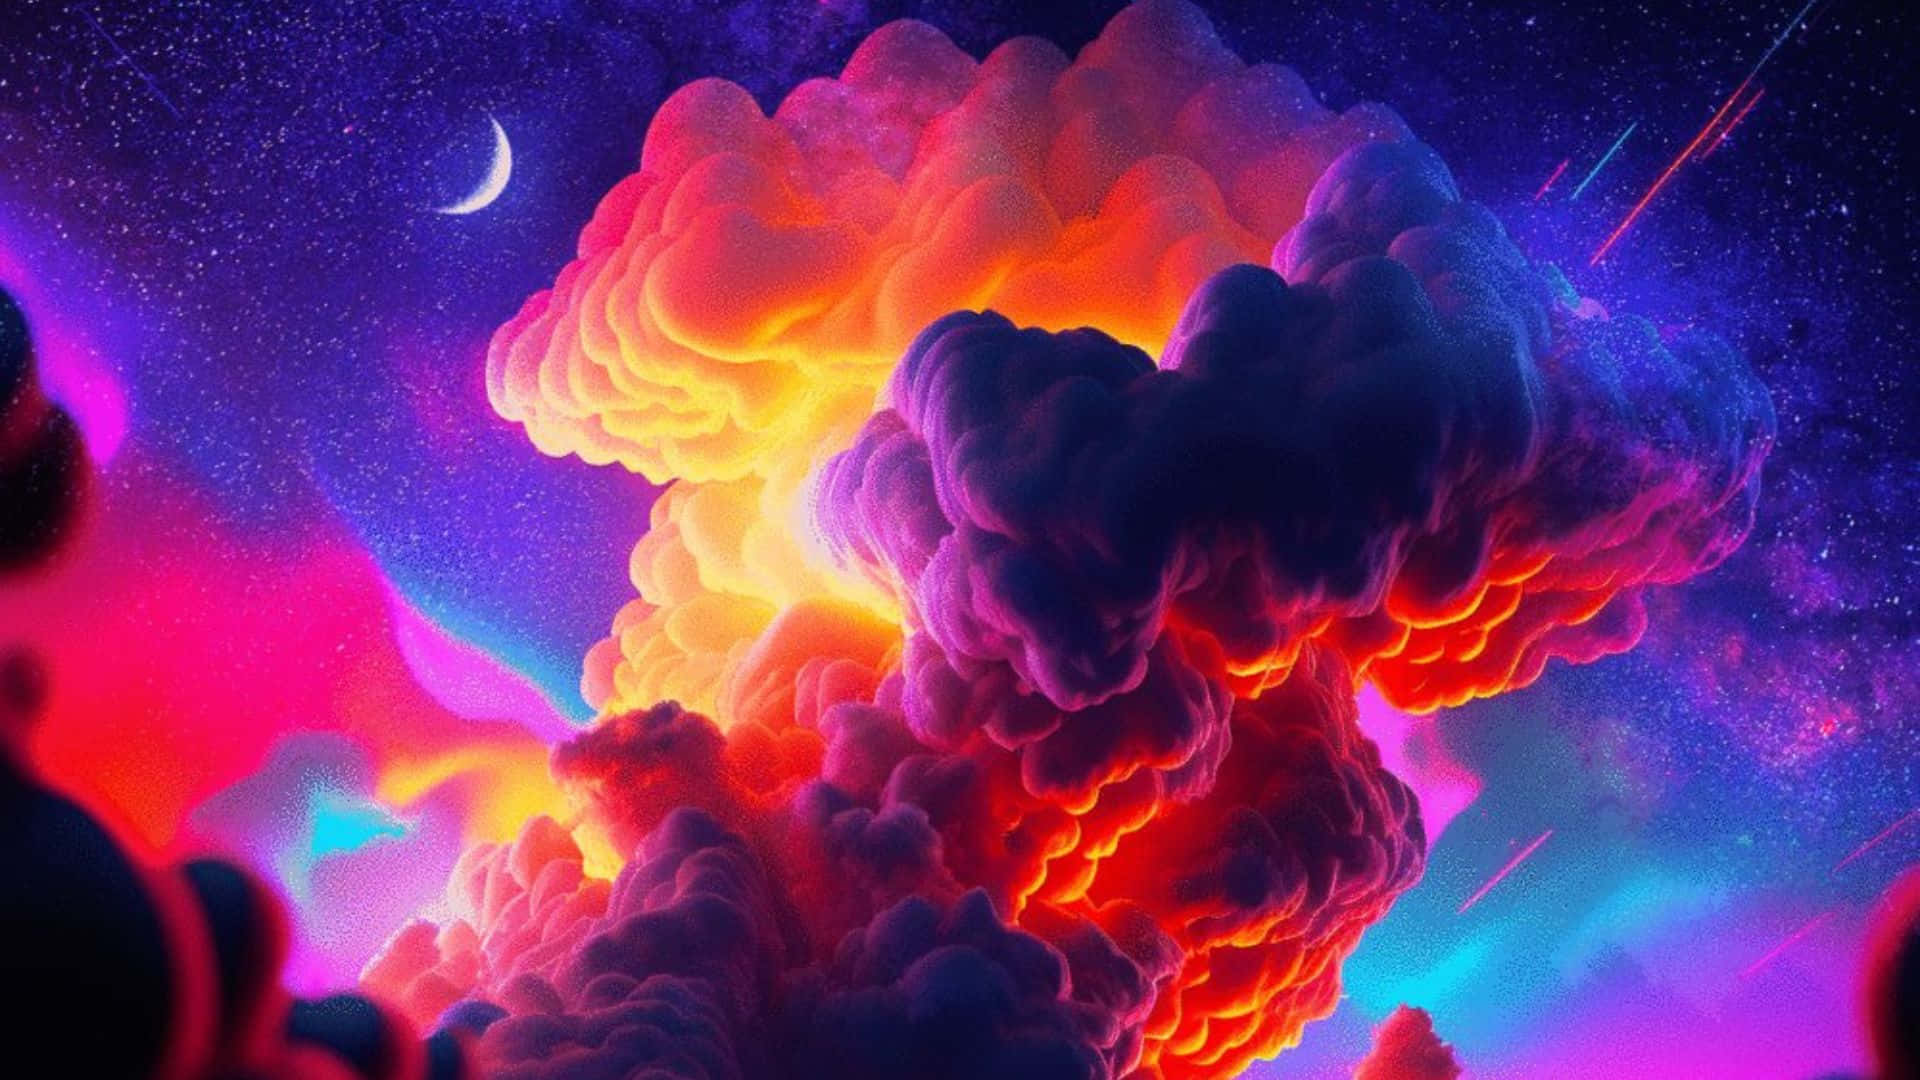 Download Surreal Trippy Sky with Vibrant Colors Wallpaper | Wallpapers.com